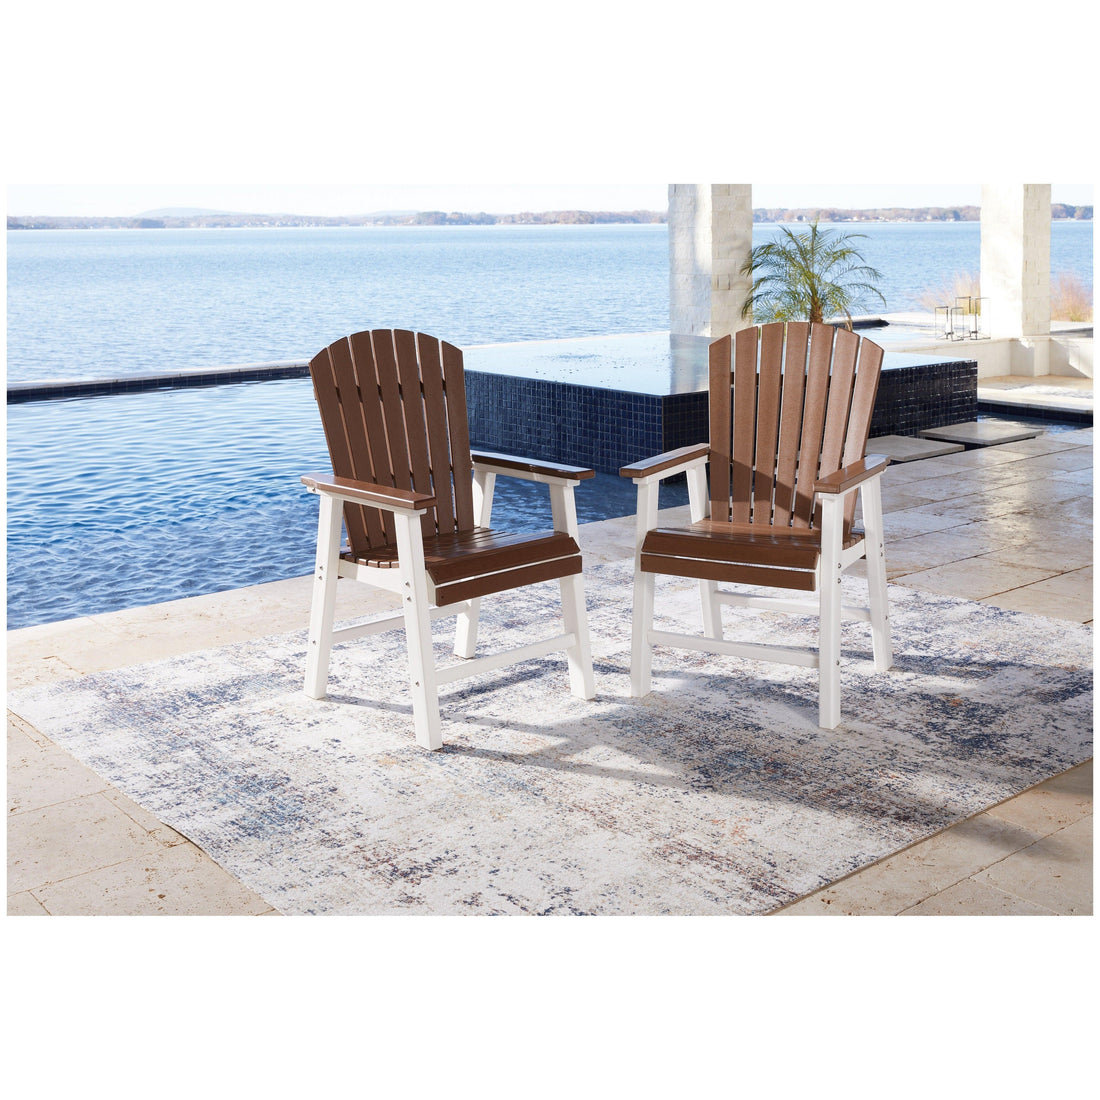 Genesis Bay Outdoor Dining Arm Chair (Set of 2) Ash-P212-601A